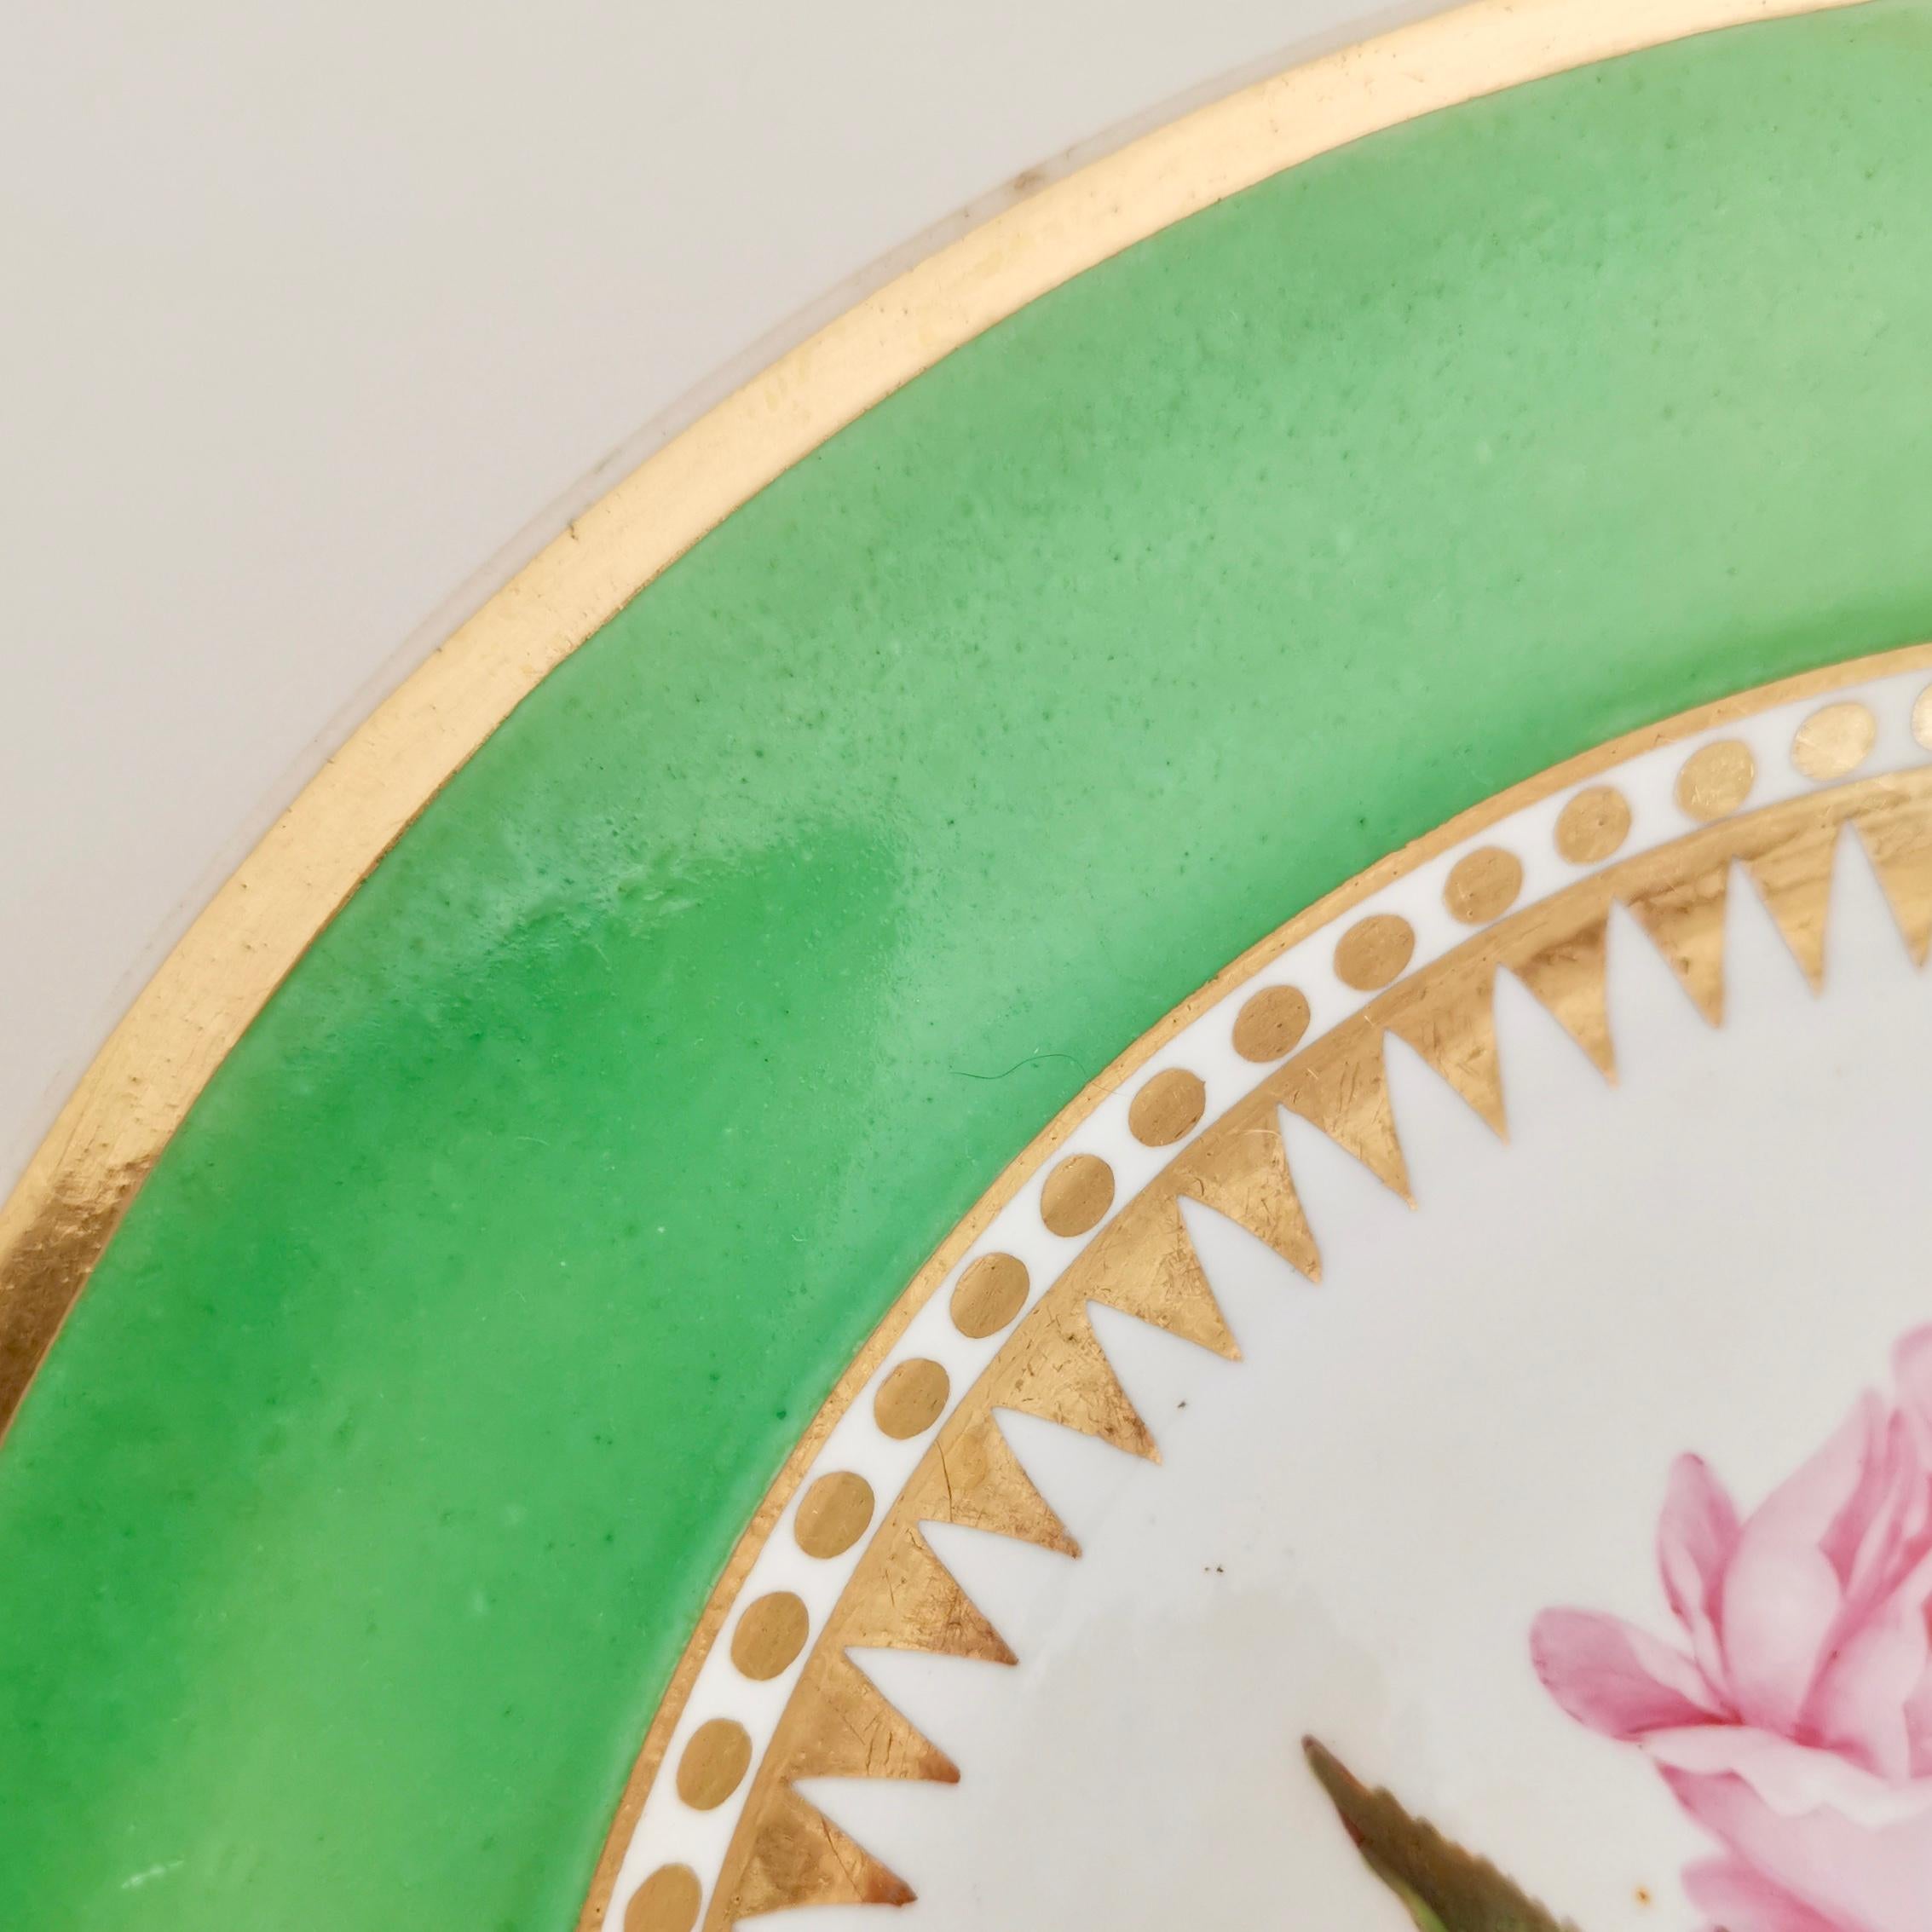 Hicks & Meigh Porcelain Plate, Green with Hand Painted Rose, Regency circa 1820 1